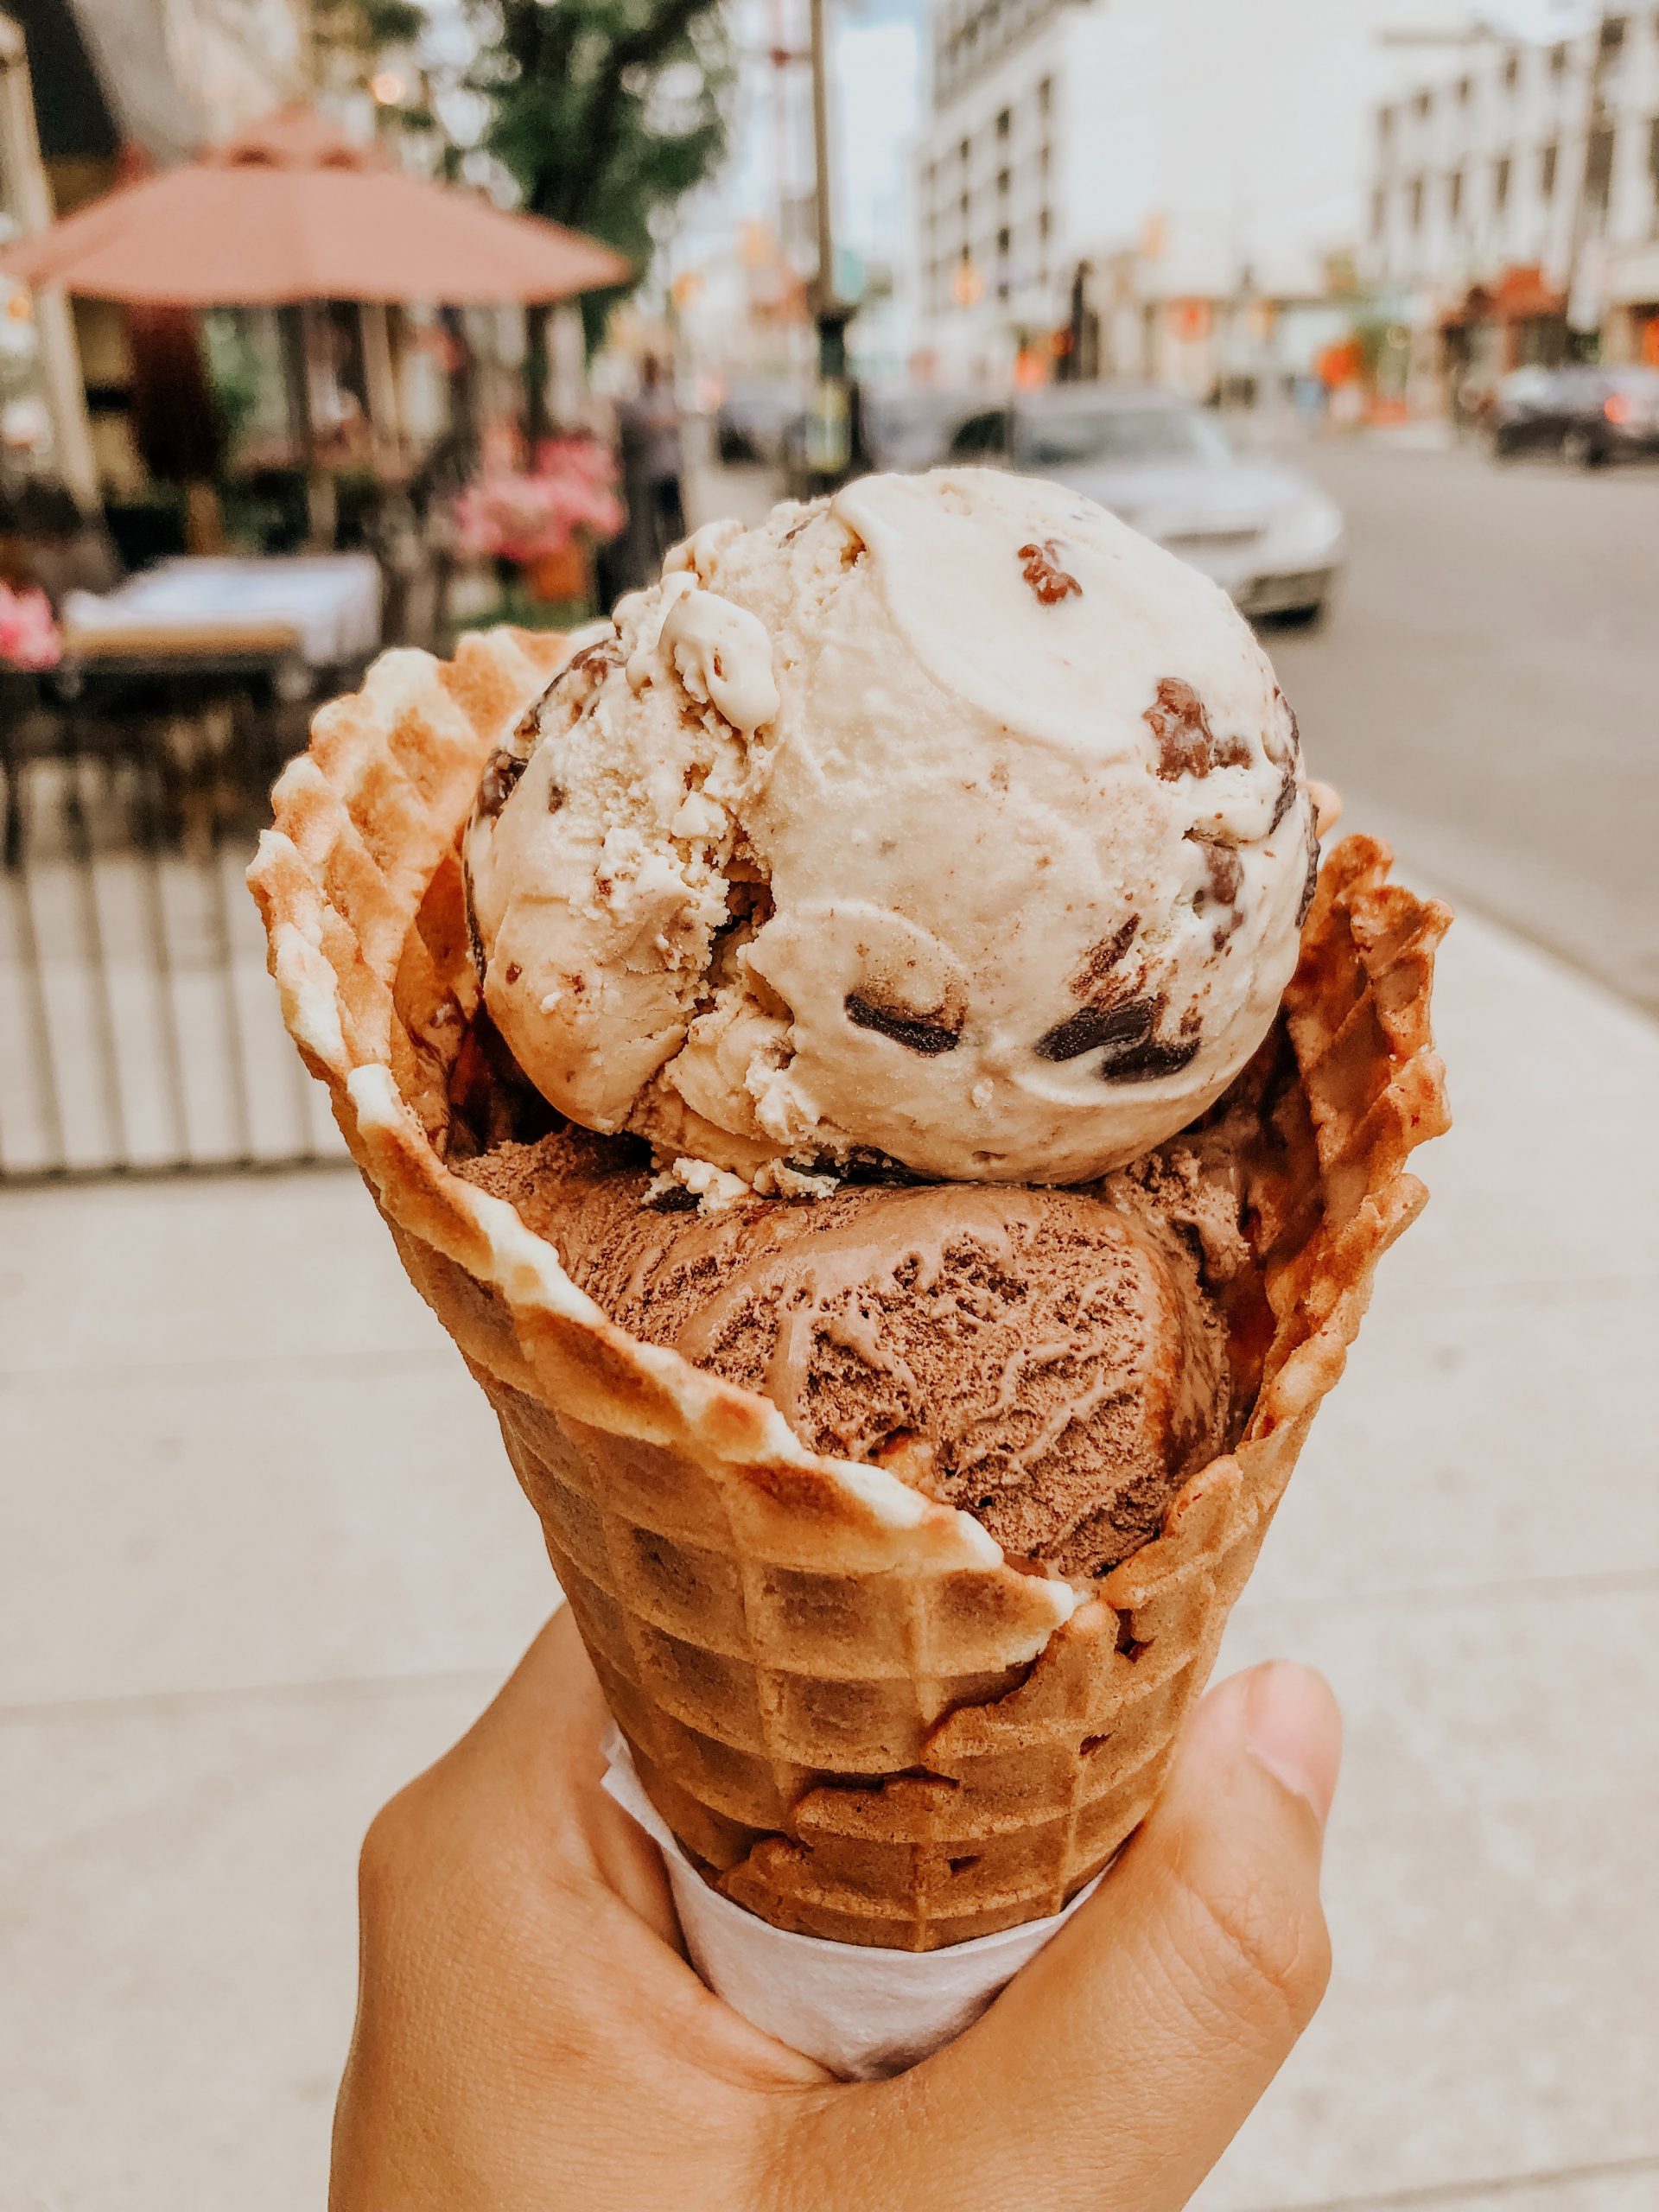 Explore NYC’s Ice Cream Shops During National Ice Cream Day this July 17 near The Sagamore